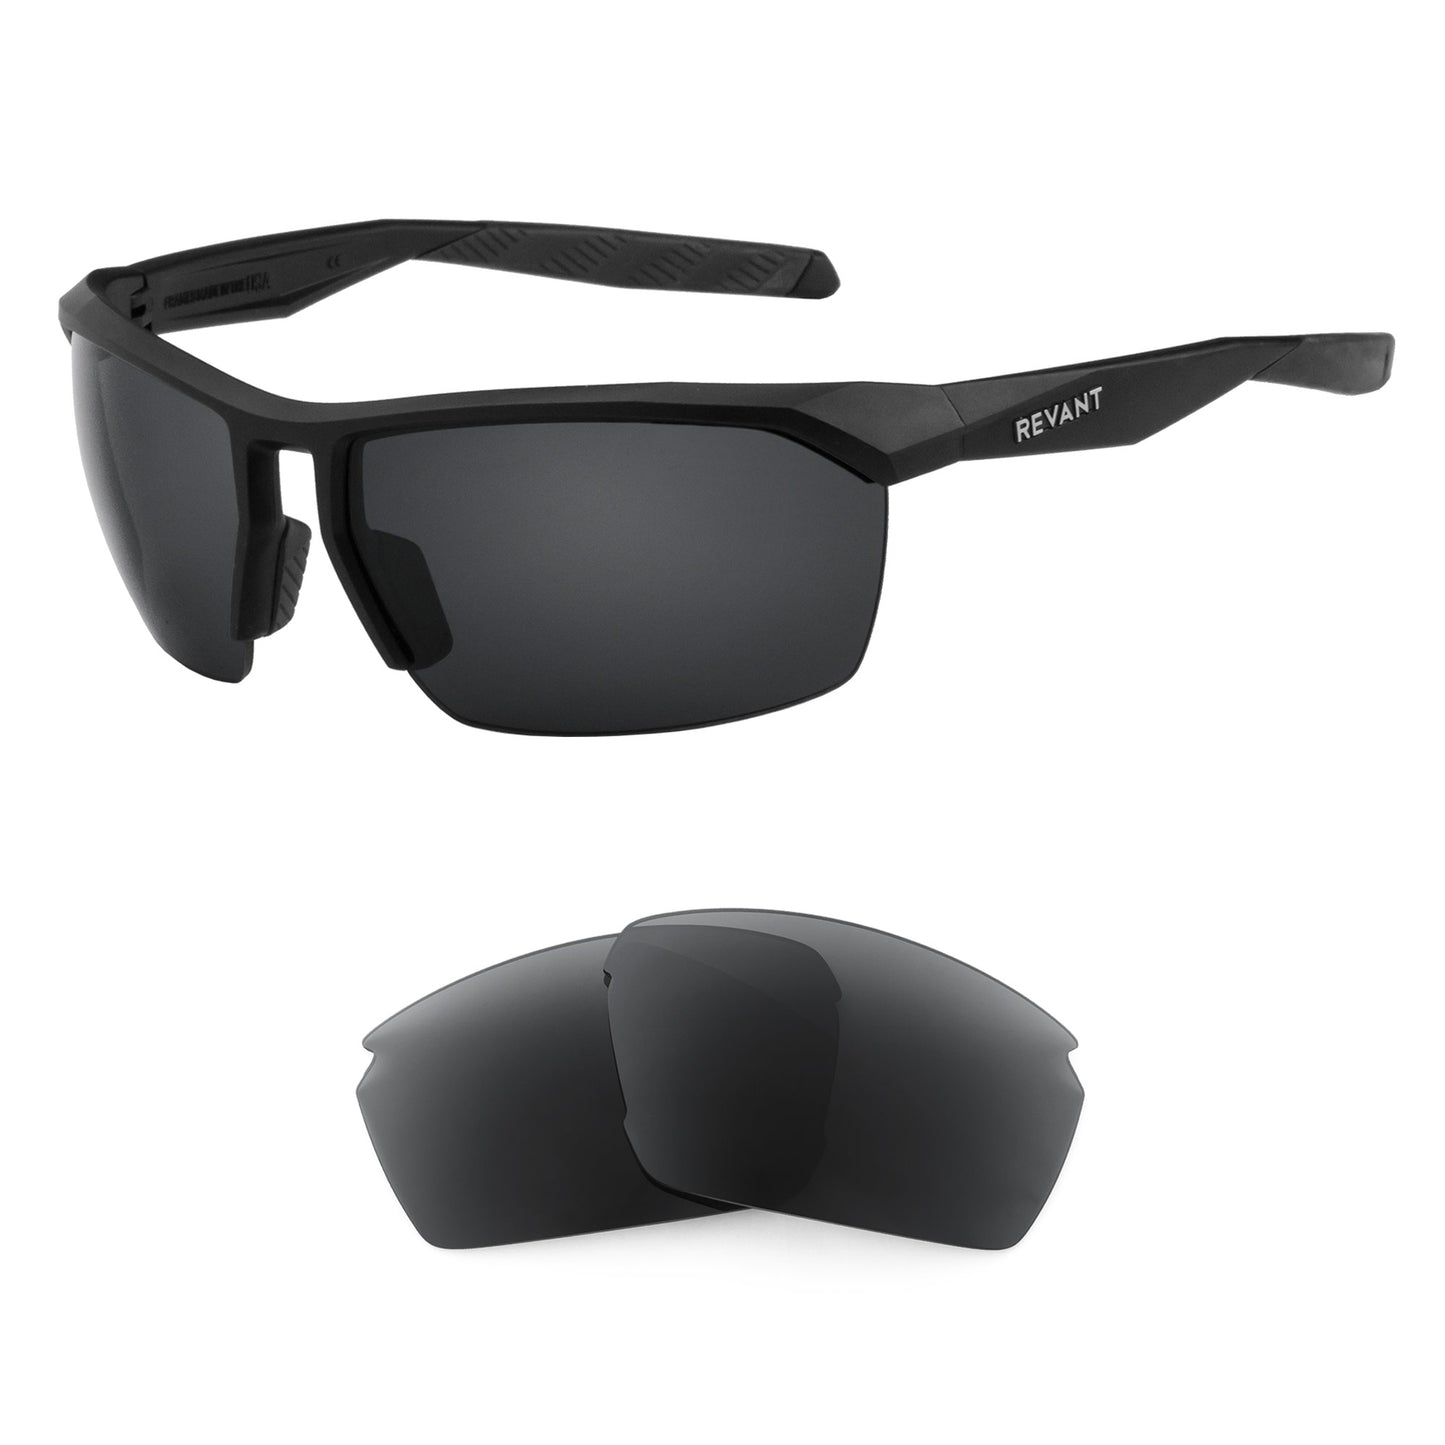 Revant S1L sunglasses with replacement lenses